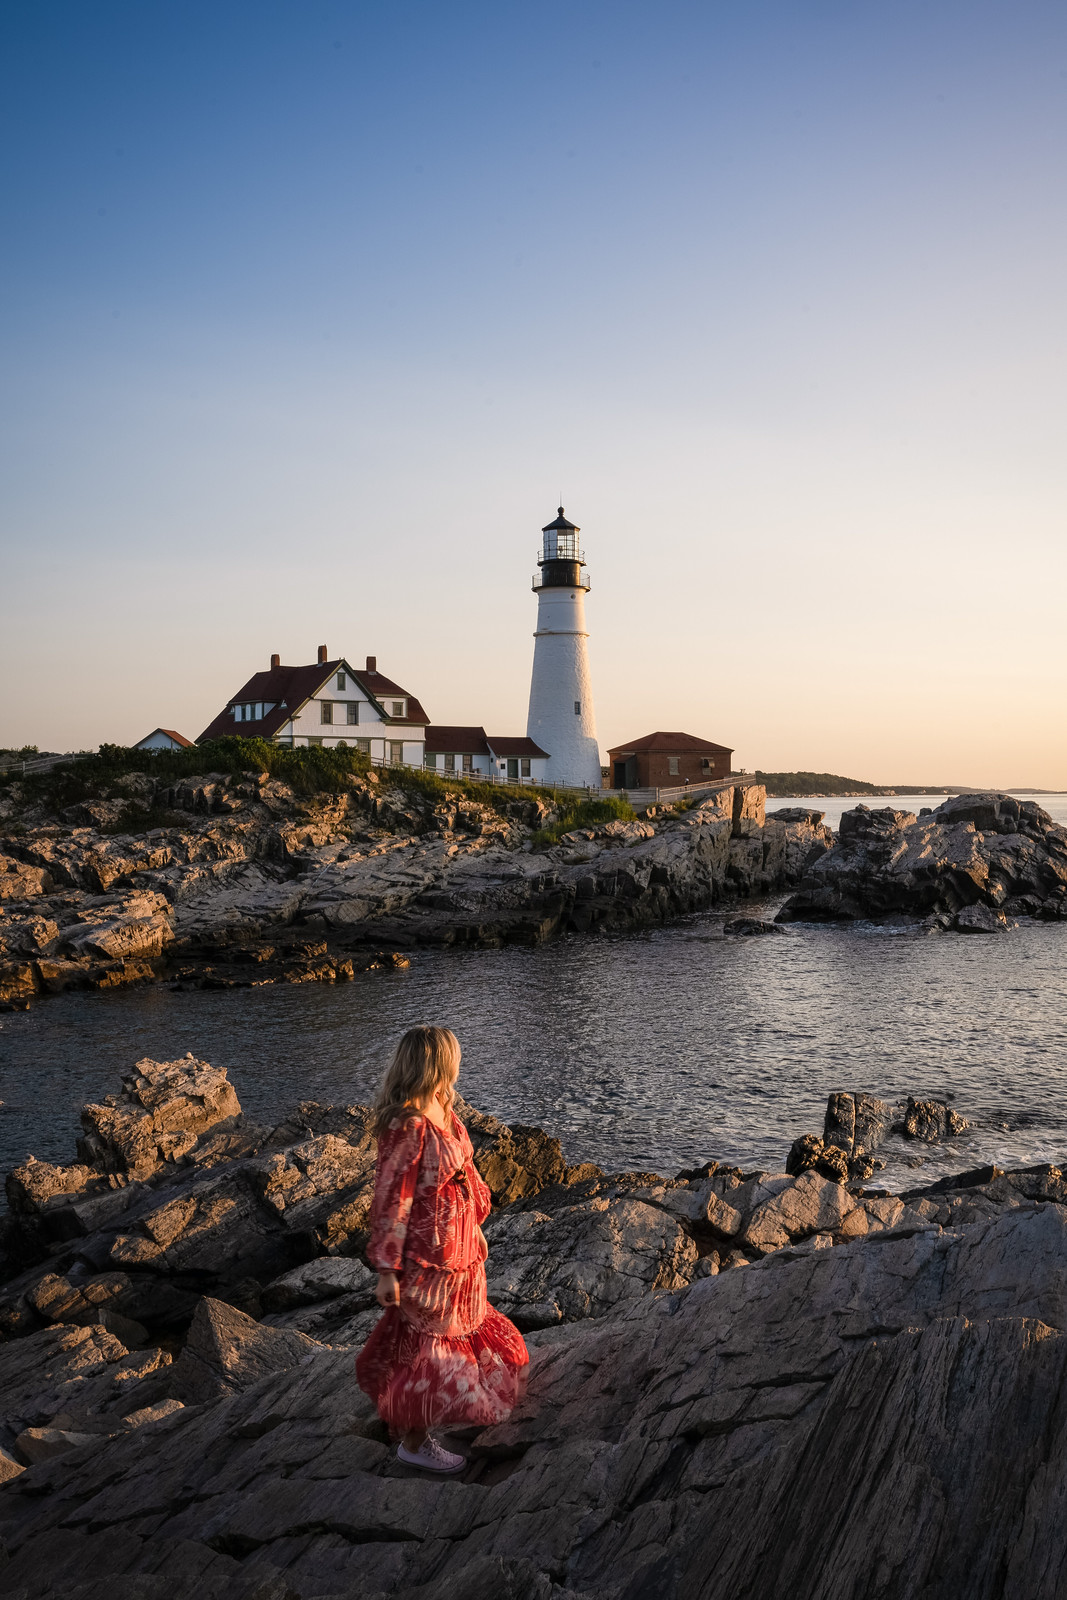 Sunrise at Portland Head Light in Portland, Maine | New England Road Trip Itinerary - New England Road Trip - The Ultimate 7 Day Itinerary - The Perfect Summer New England Road Trip Itinerary